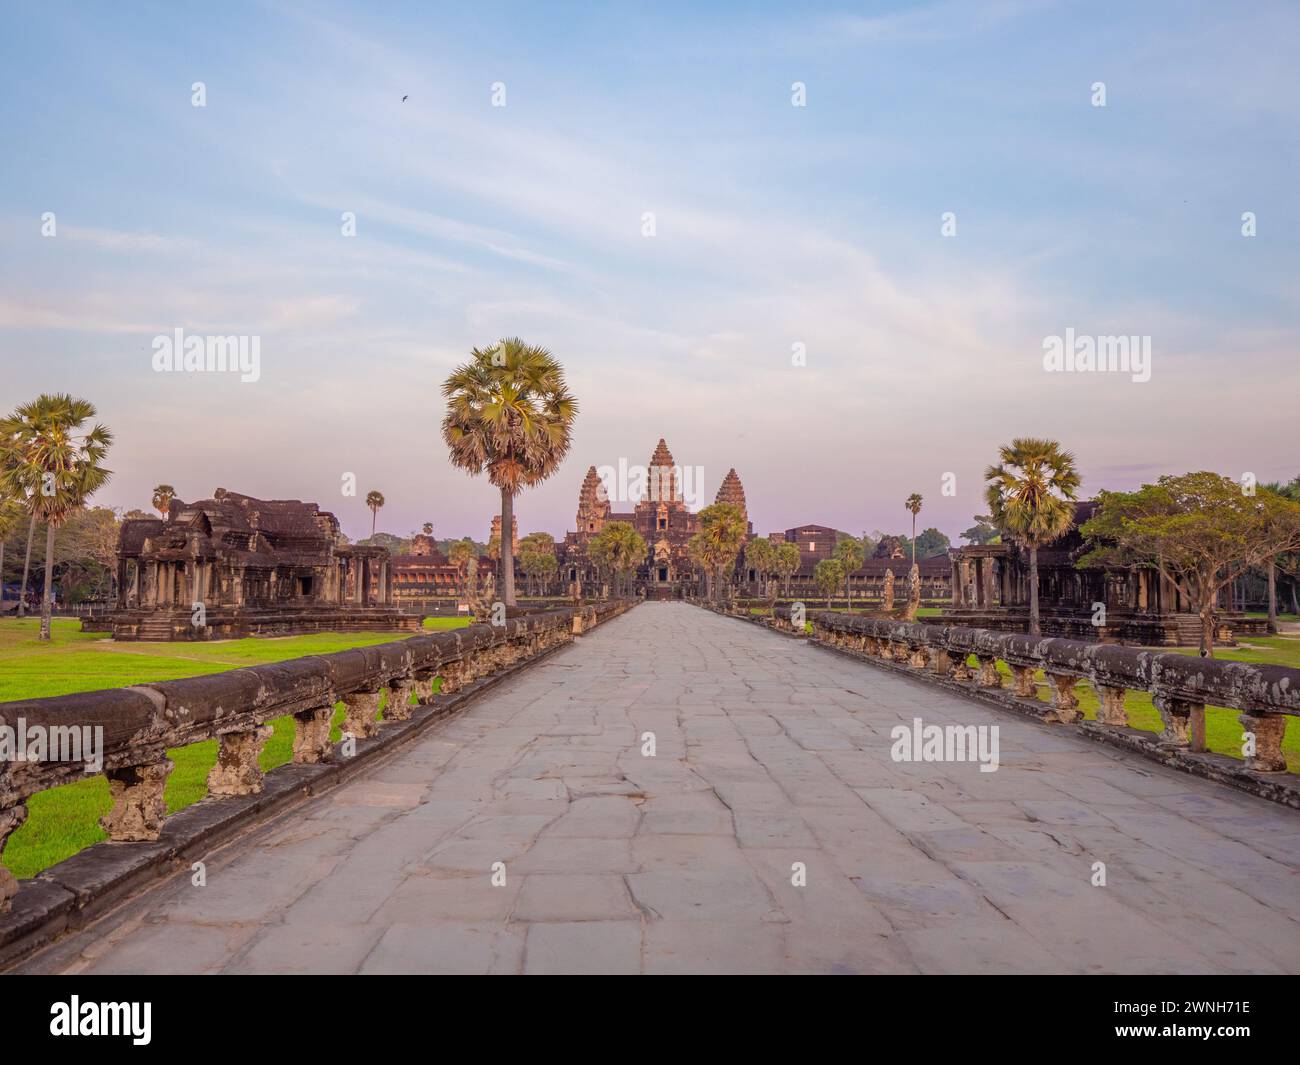 Angkor Wat Main Temple at Sunset with No People and No Tourists - Bridge Stock Photo